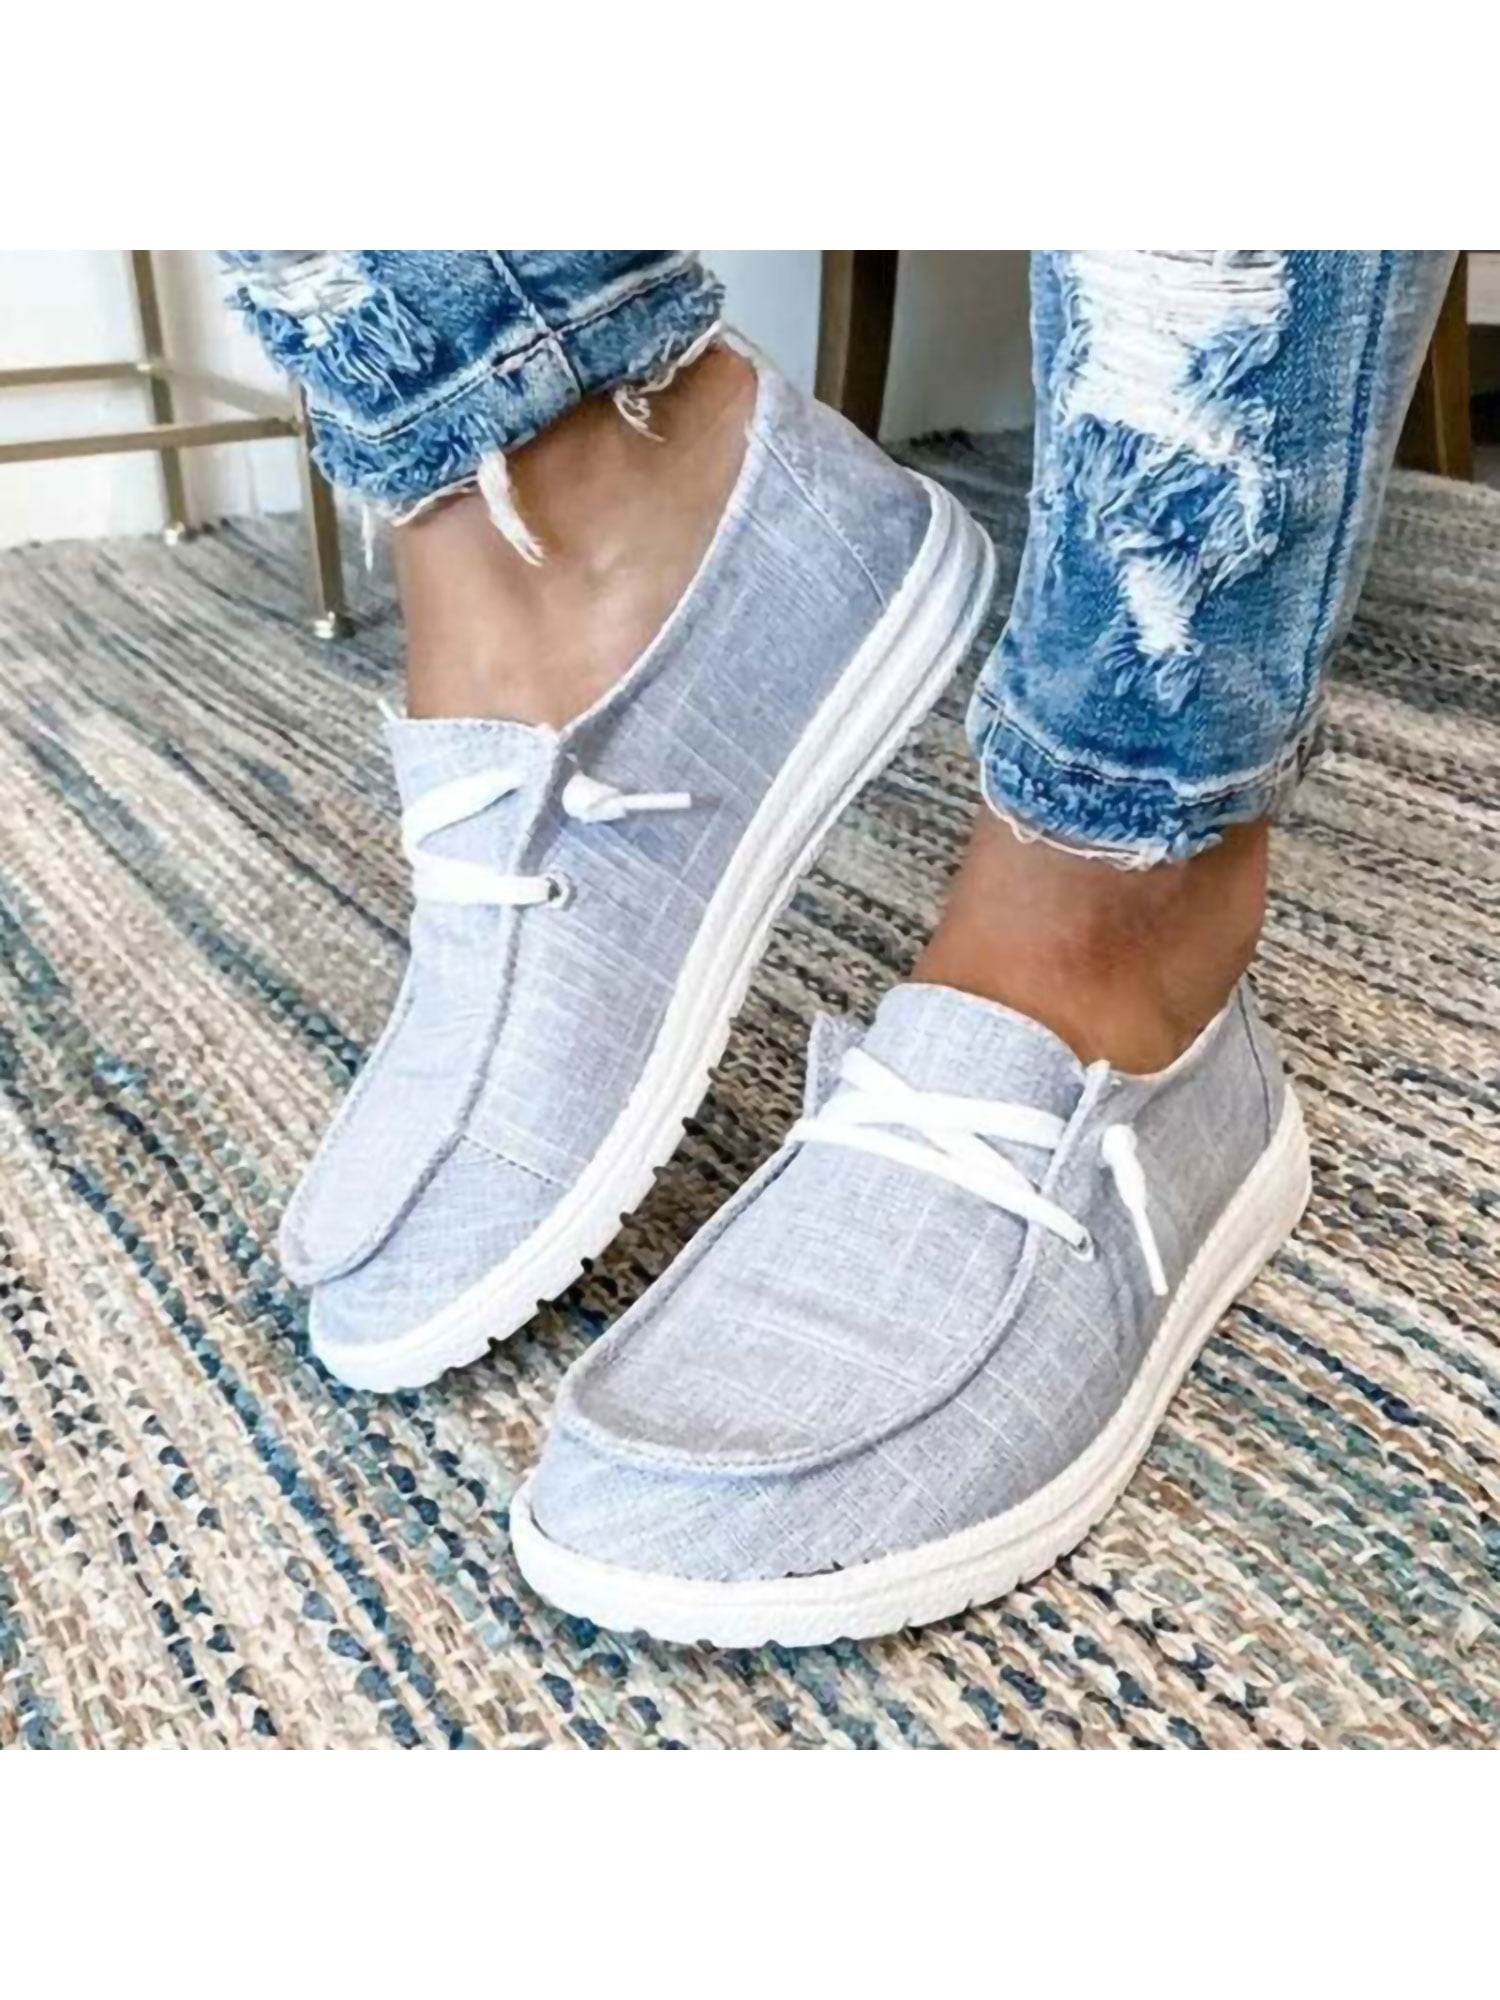 Women Roses in The Cat Slip On Lightweight Canvas Upper Sneakers Shoes Fashion 